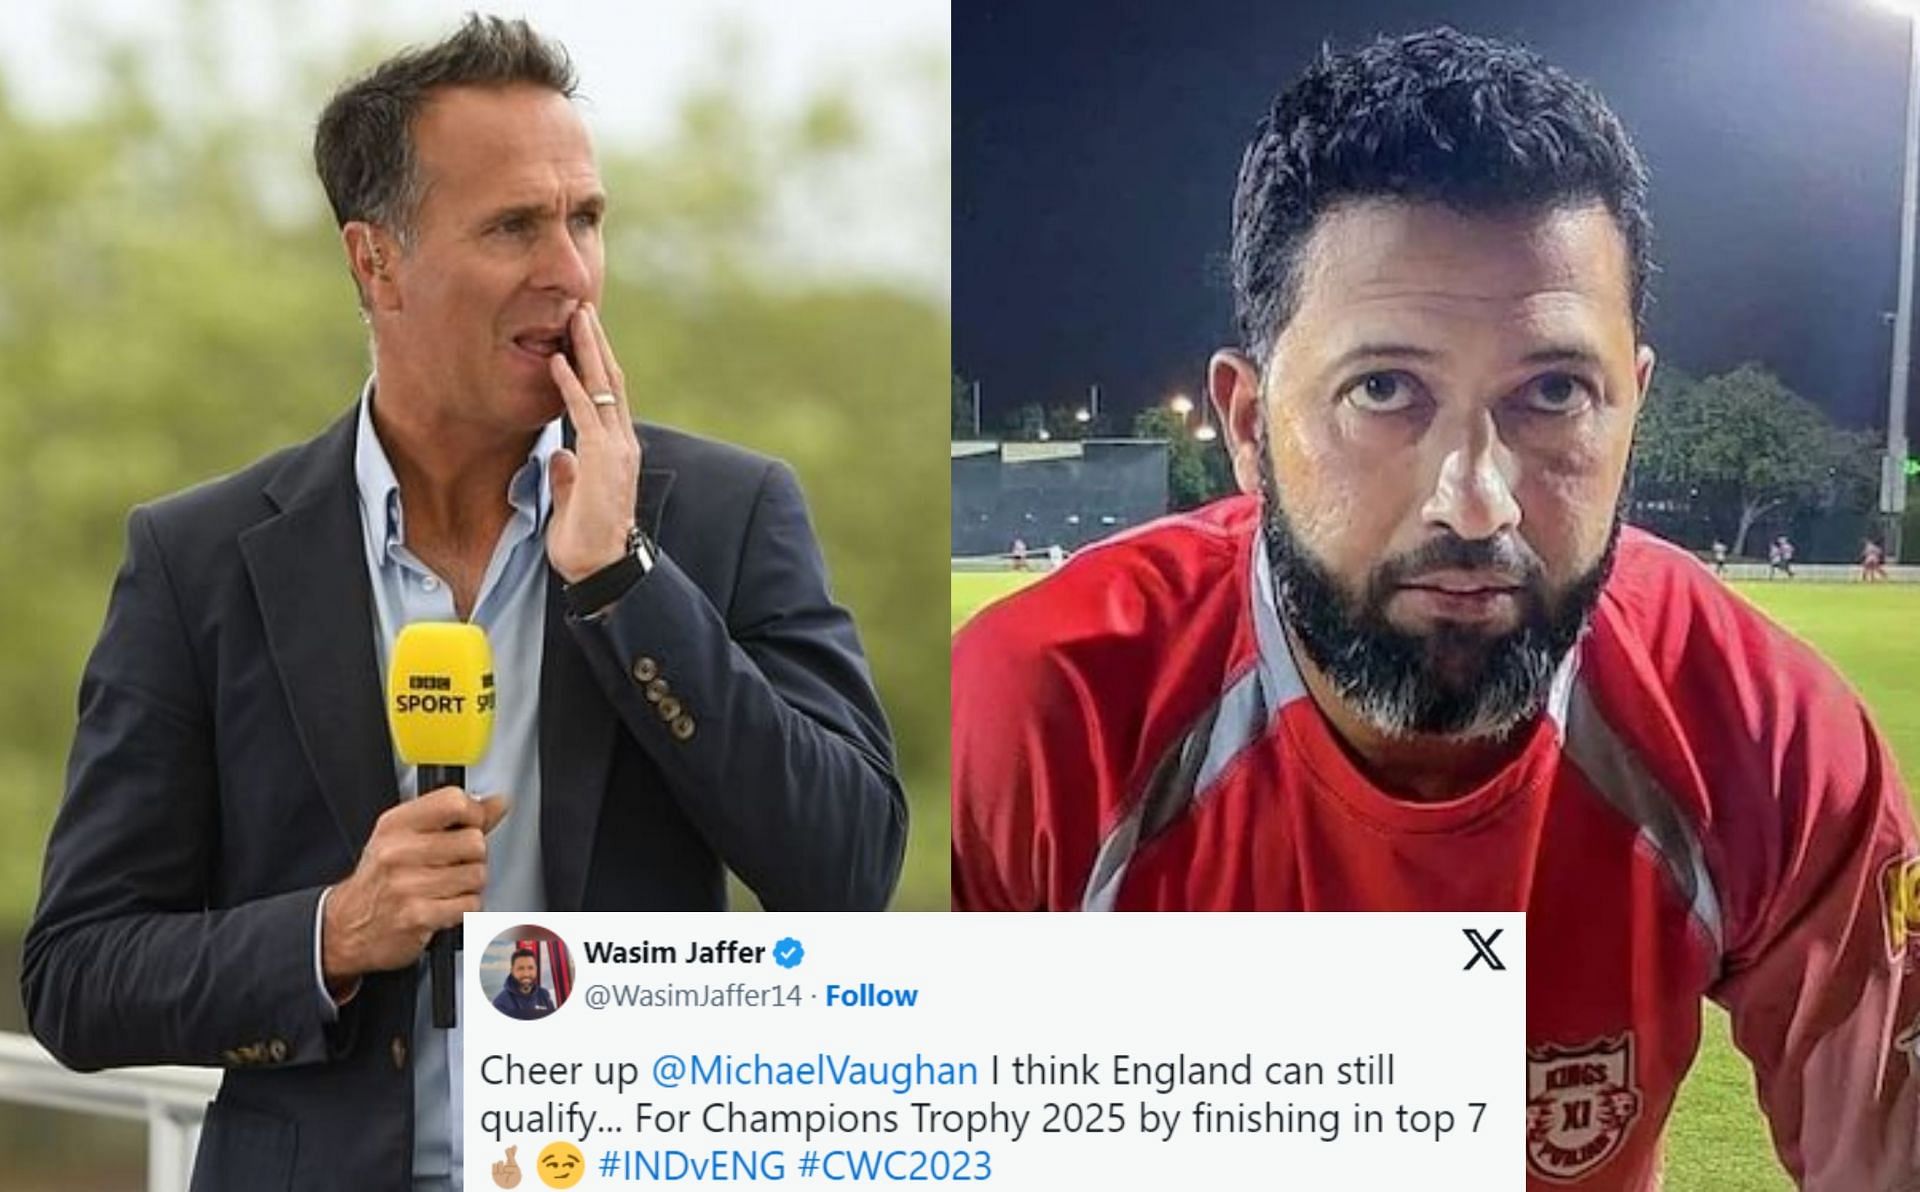 Wasim Jaffer sent a message to Michael Vaughan after India